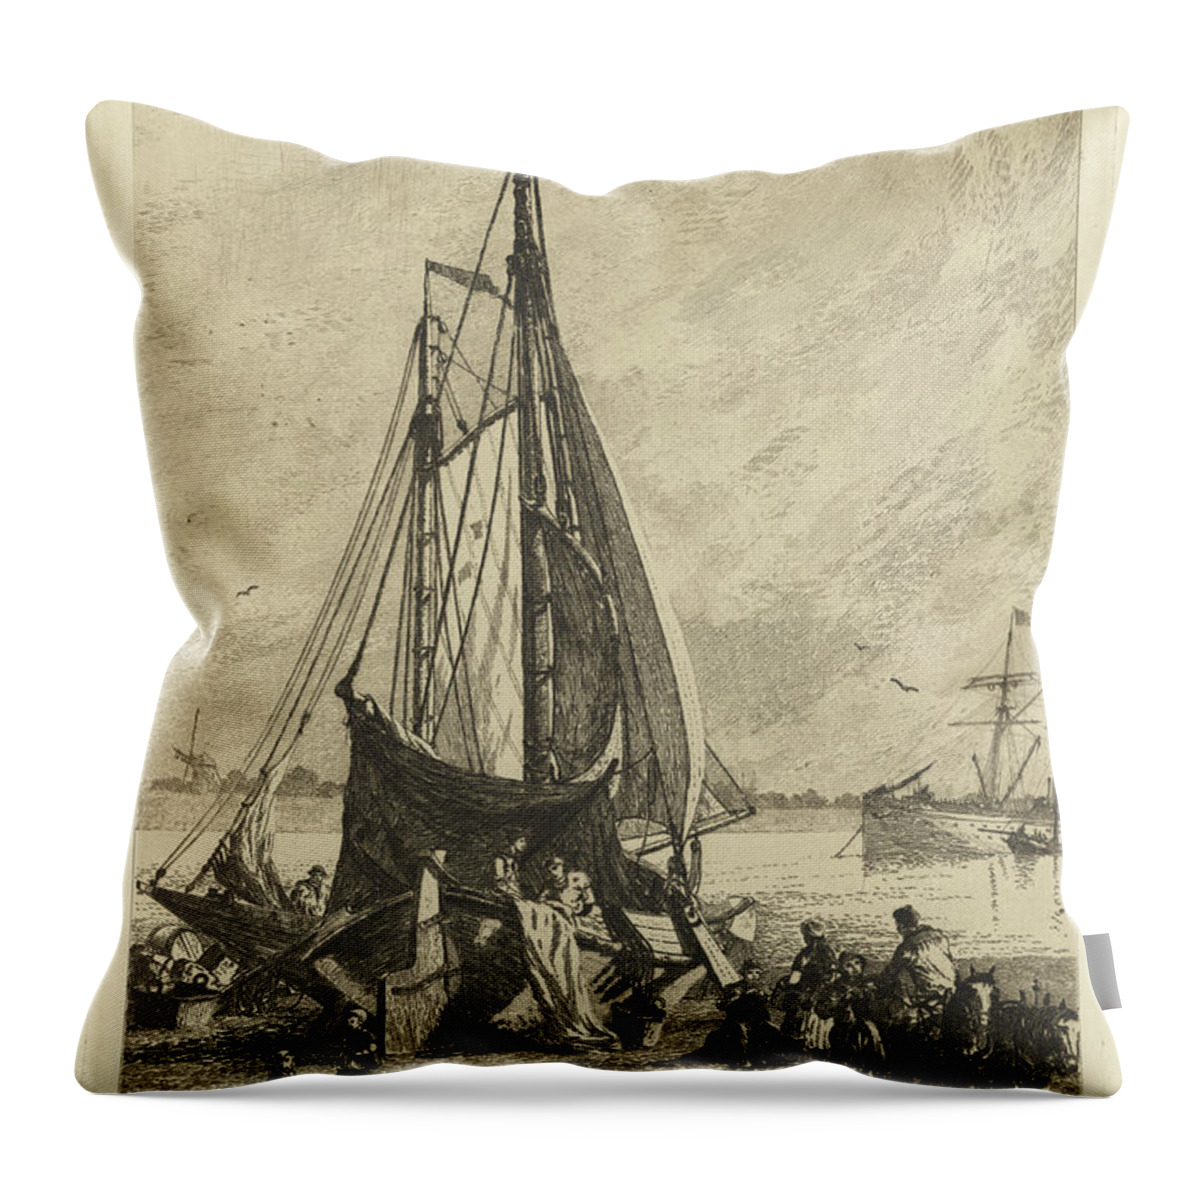 Dutch Throw Pillow featuring the painting Etsning hollandska by MotionAge Designs